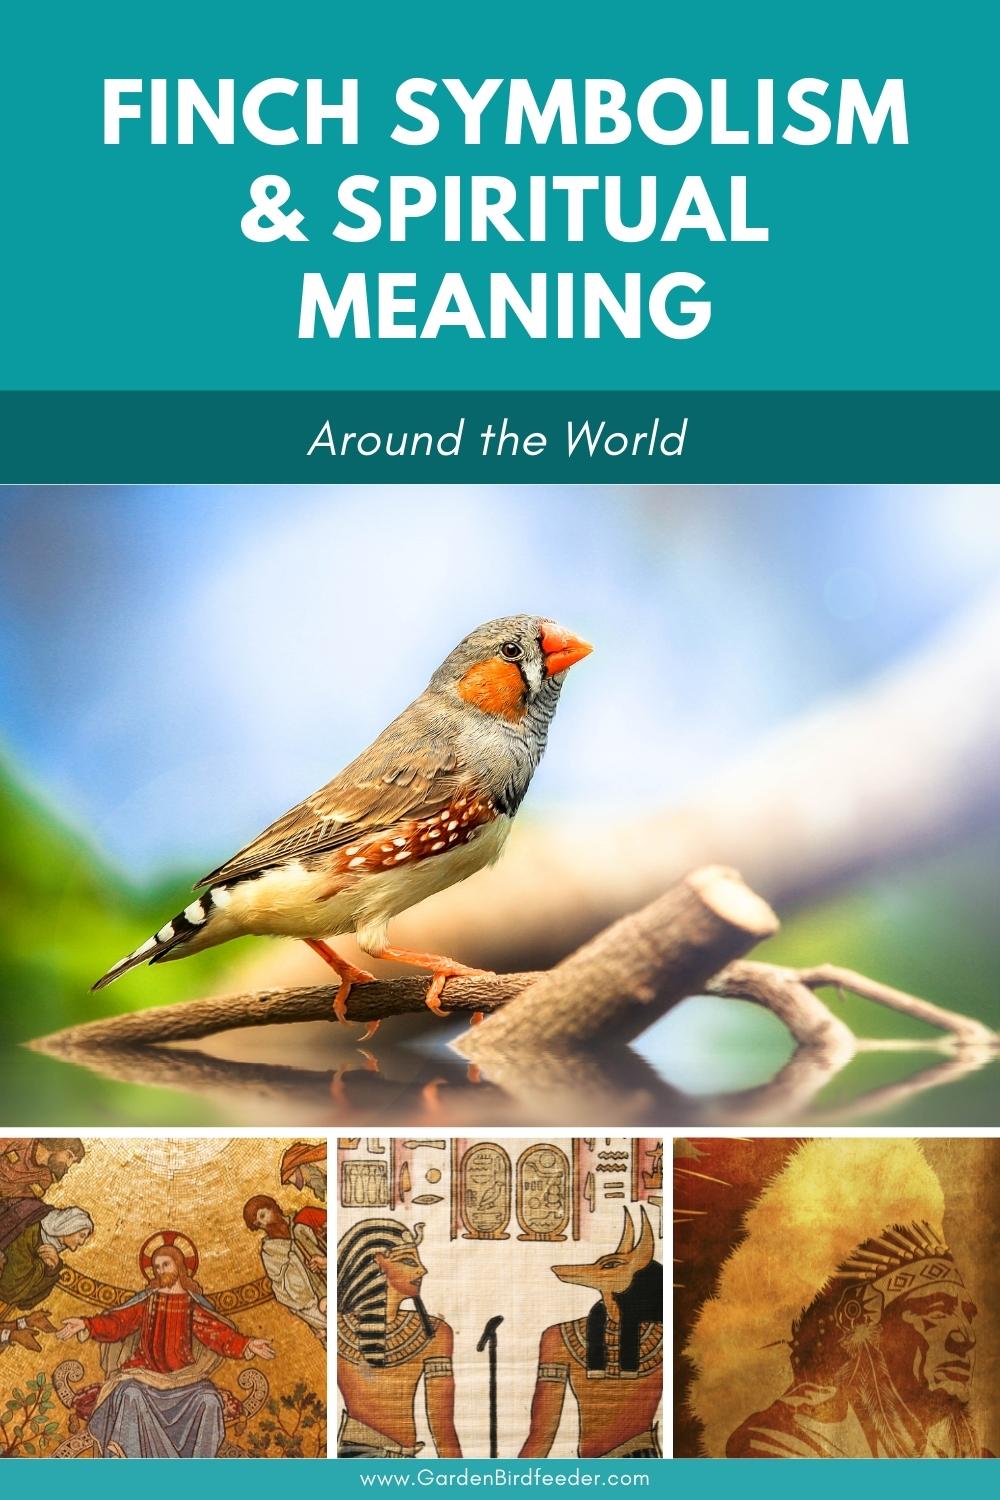 Finch symbolism and spiritual meaning. Learn what finches represent in the Bible, different religions, cultures, and in our dreams.